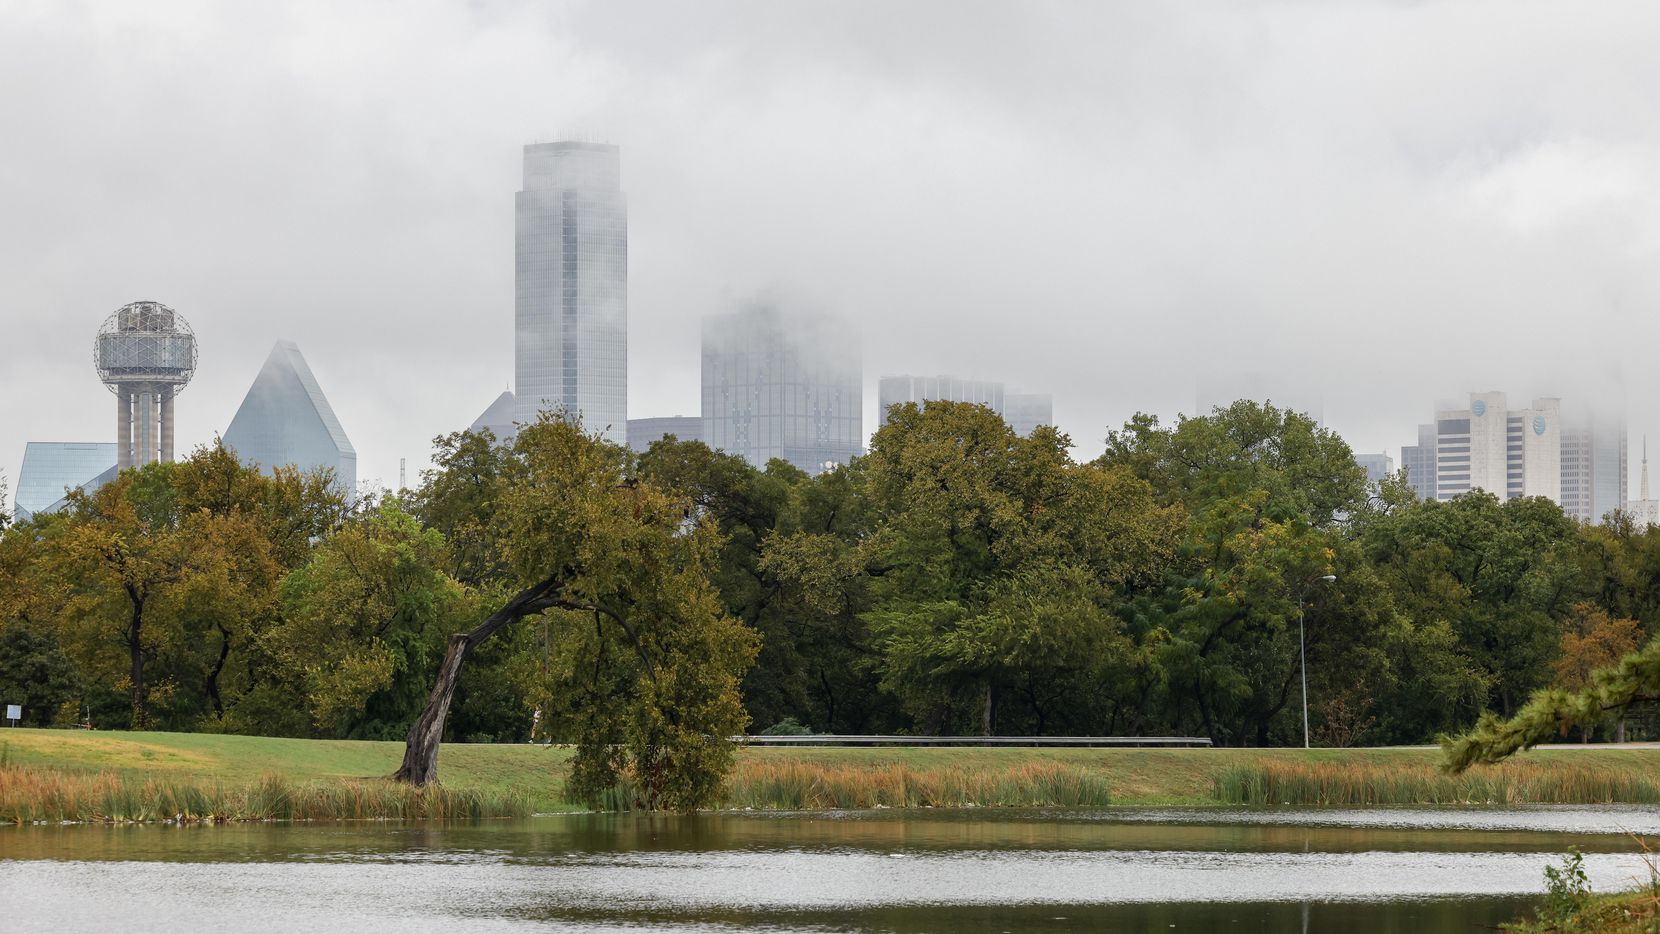 The downtown Dallas skyline emerges from a layer of low clouds as seen from Lake Cliff Park in Oak Cliff on Wednesday, Oct. 27, 2021. (Elias Valverde II/The Dallas Morning News)